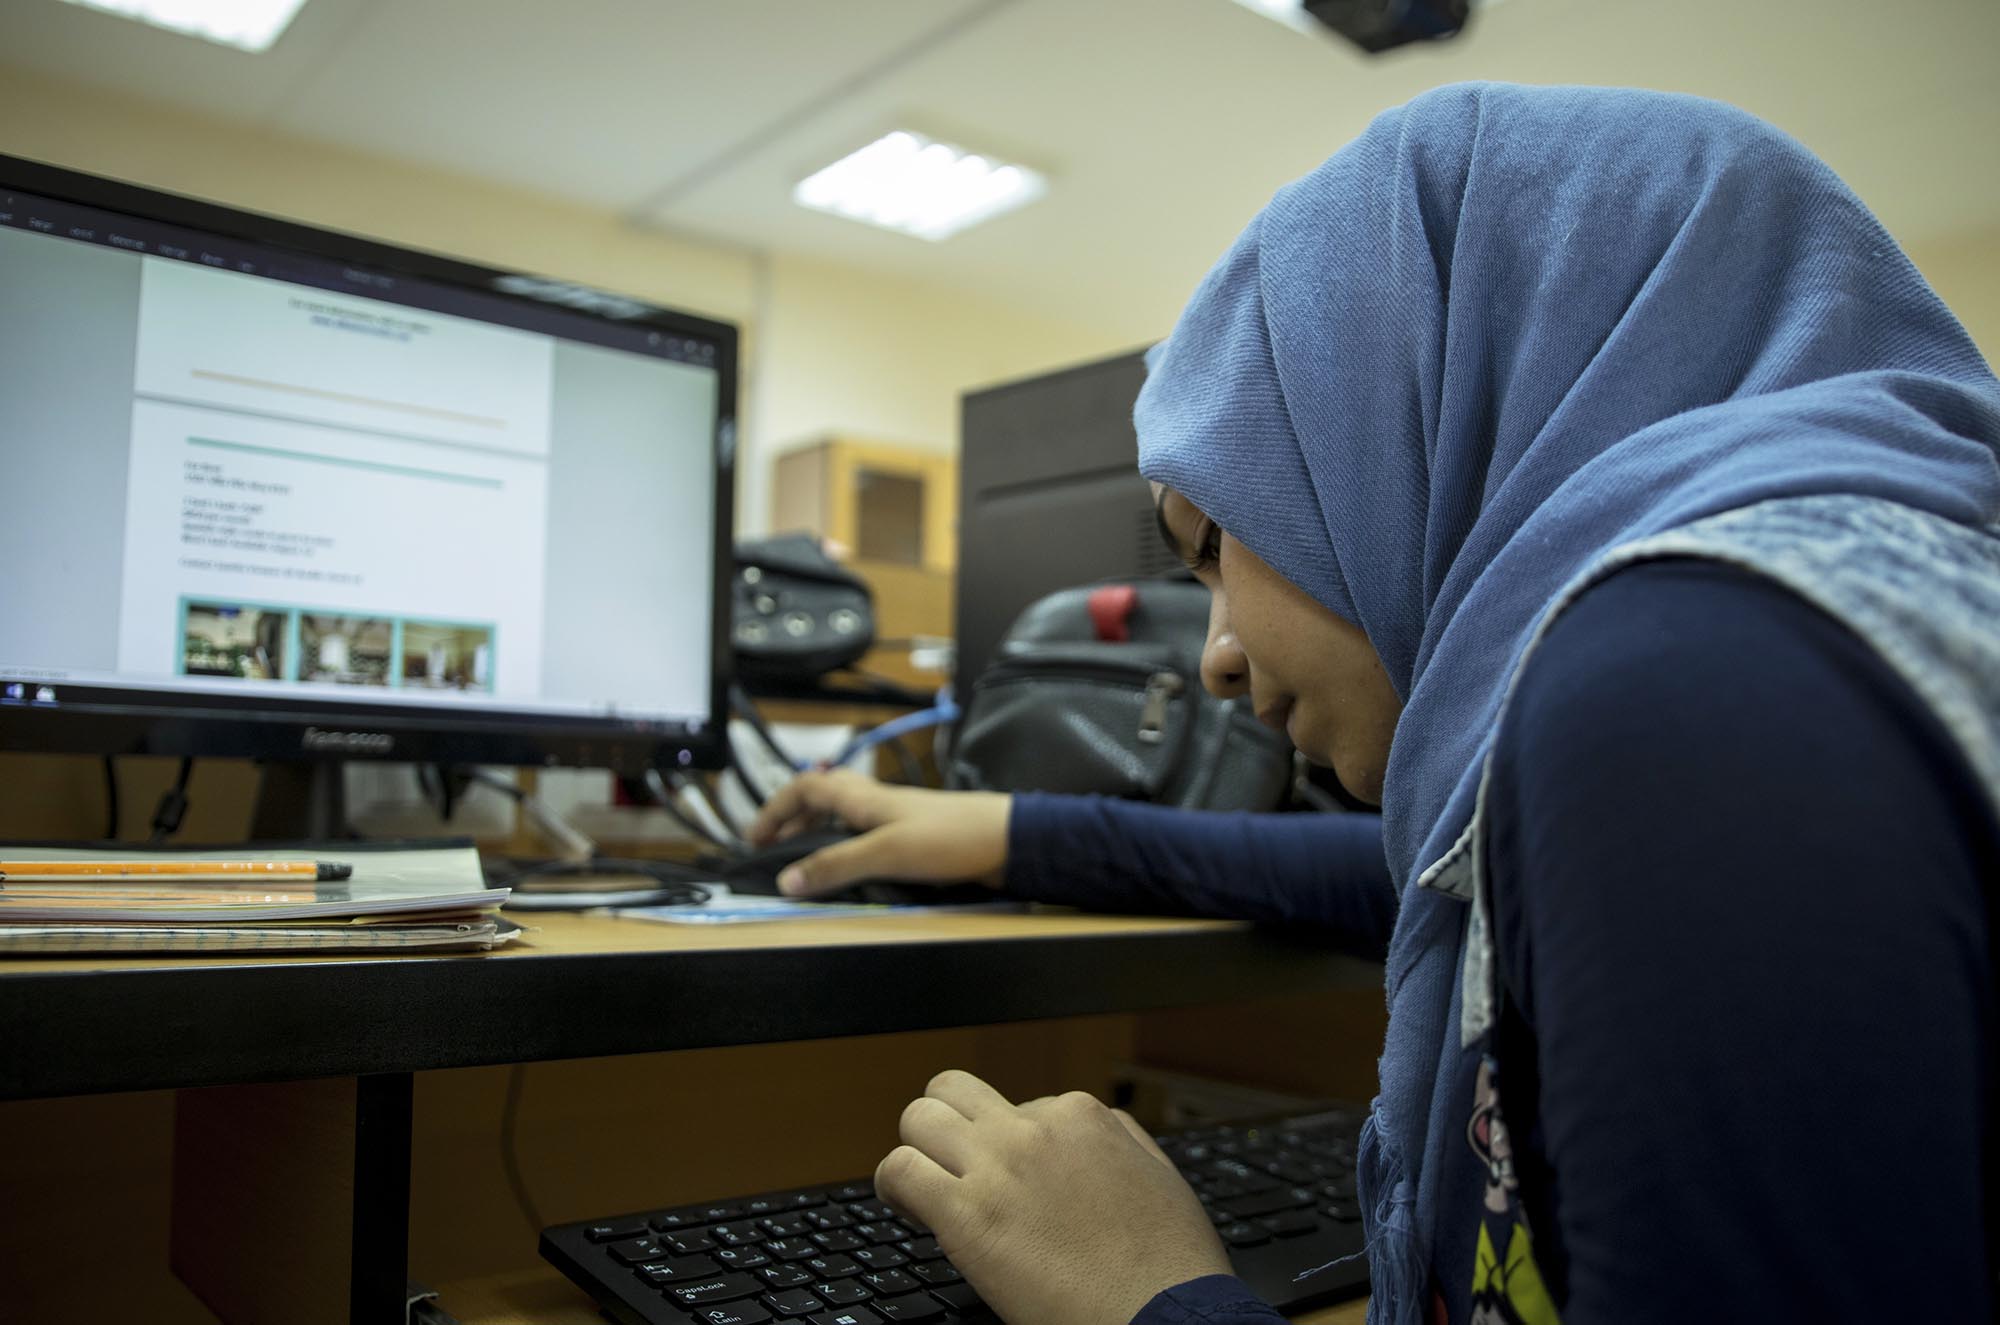 Boys and girls take computer classes in Anera's job skills courses for refugees in Lebanon.